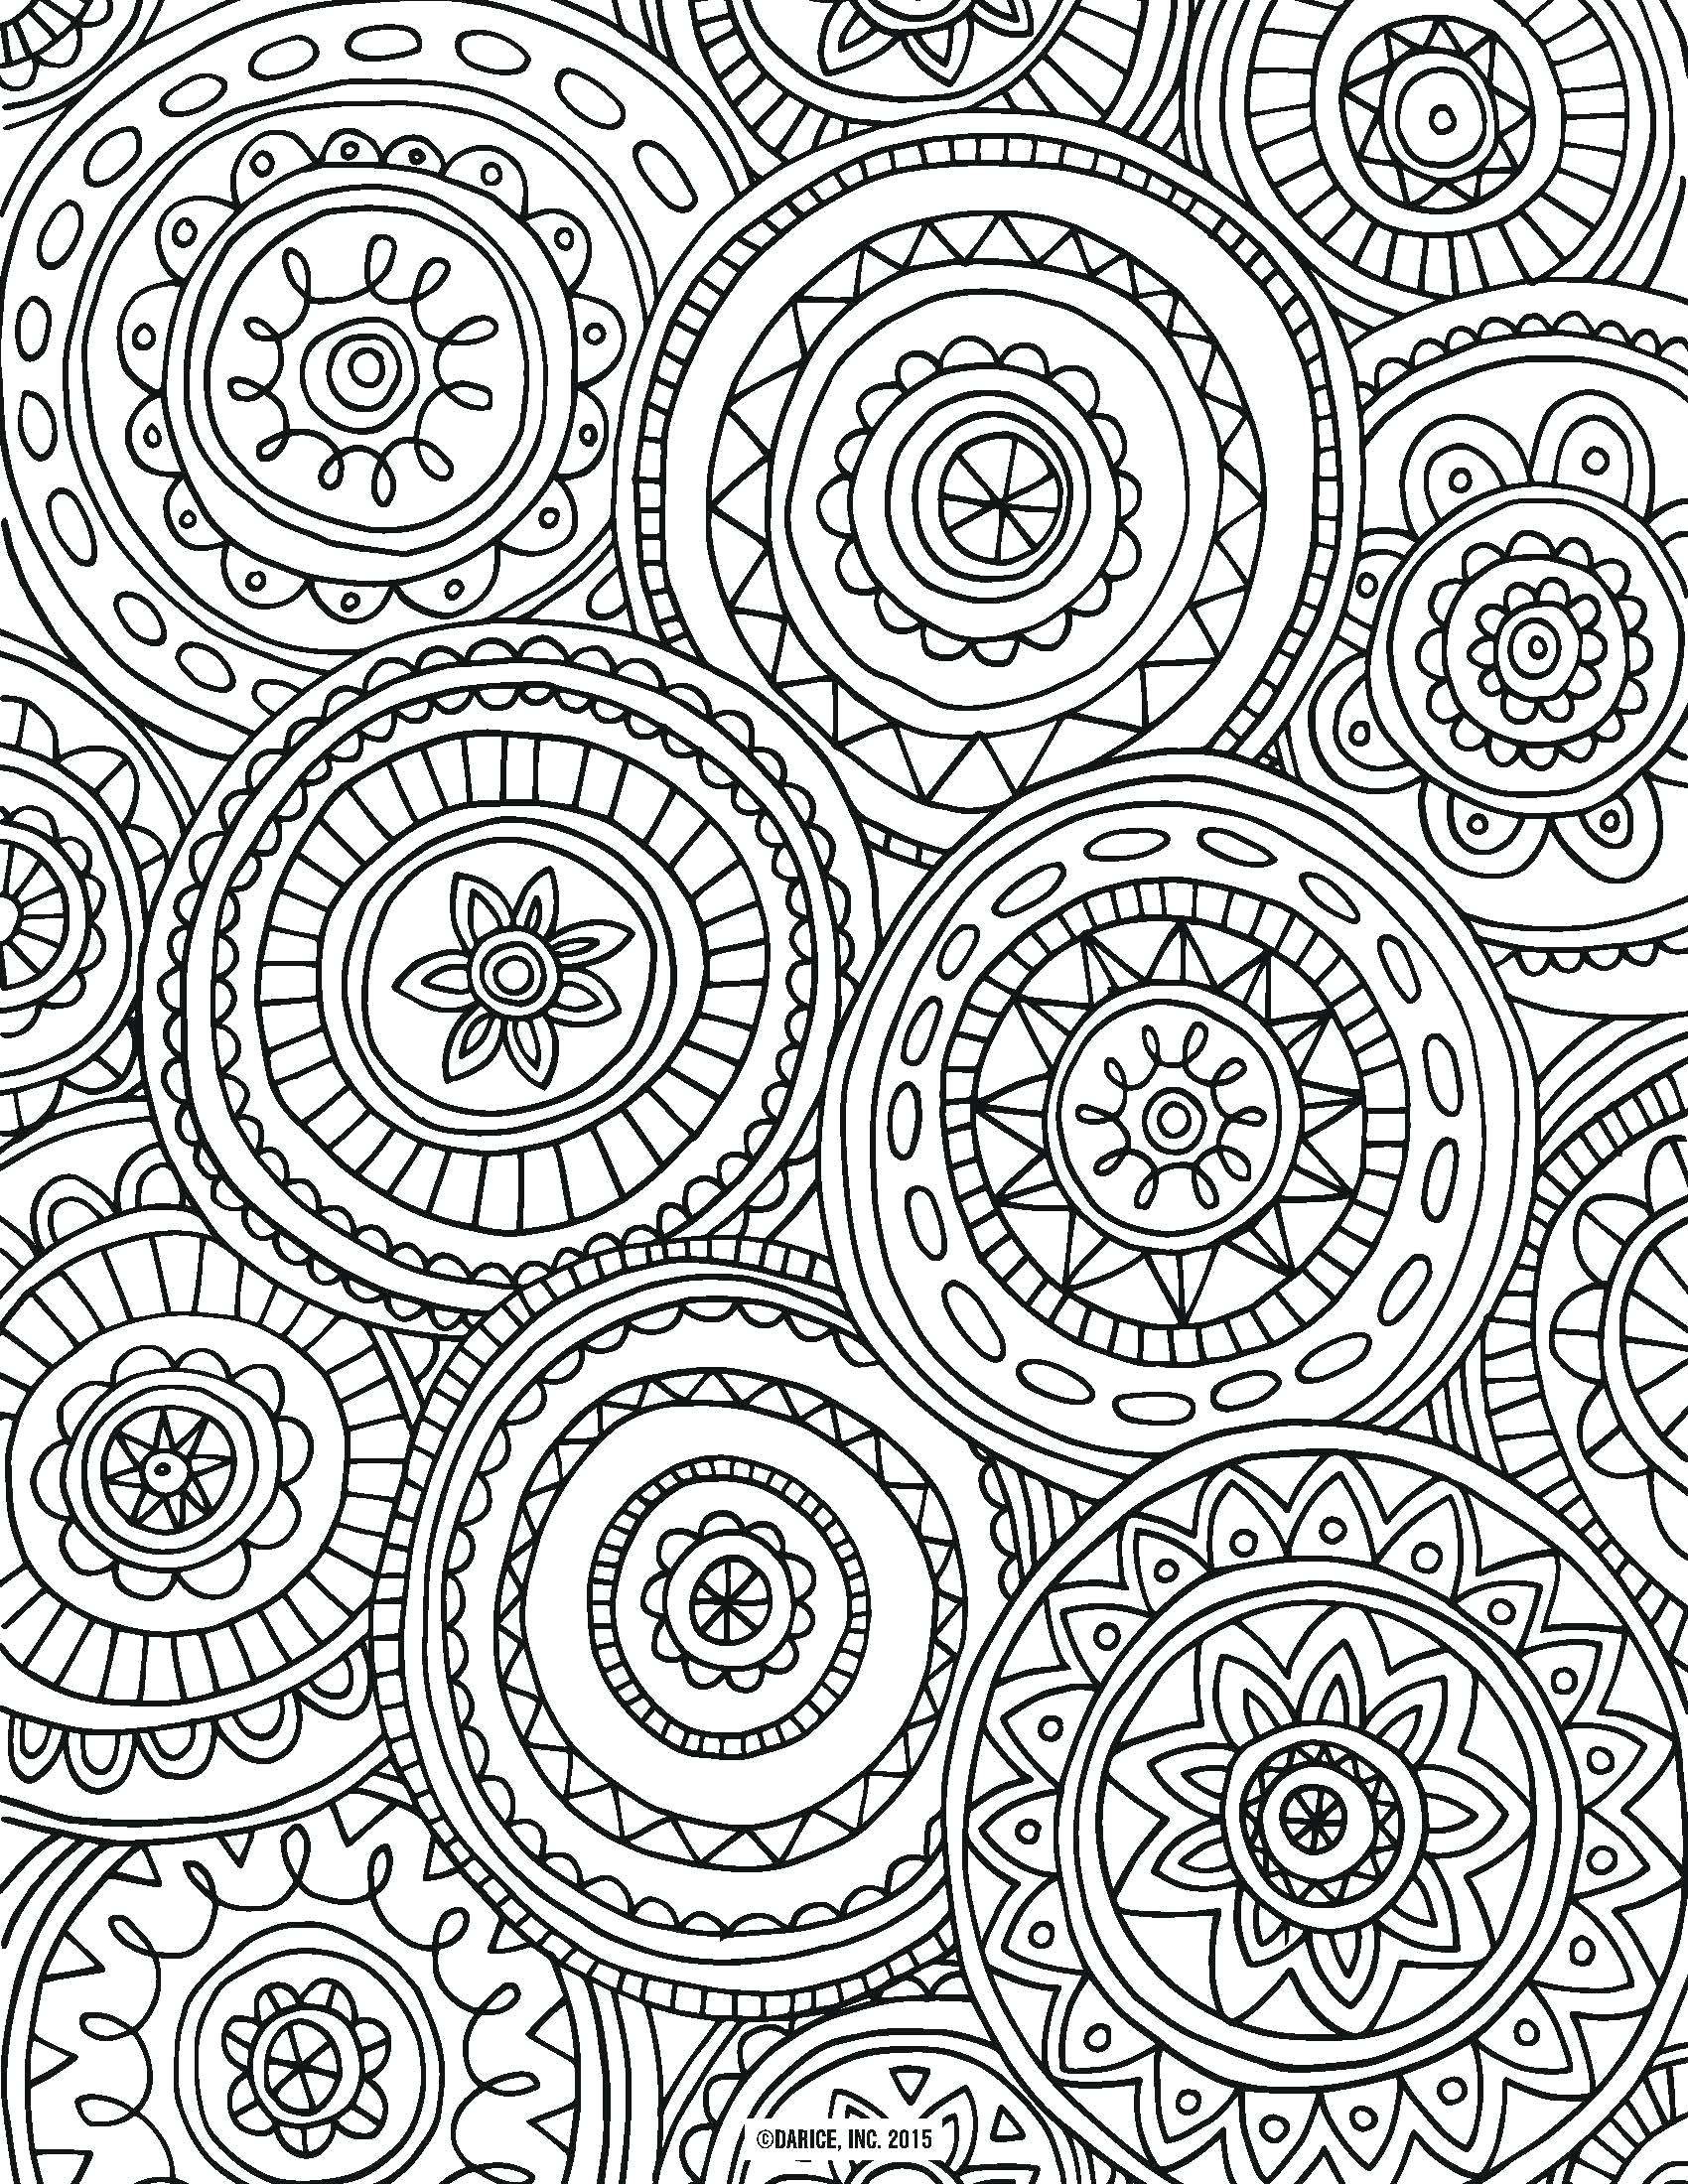 Free Printable Coloring Pages For Adults Only Swear Words – Jvzooreview - Free Printable Coloring Pages For Adults Only